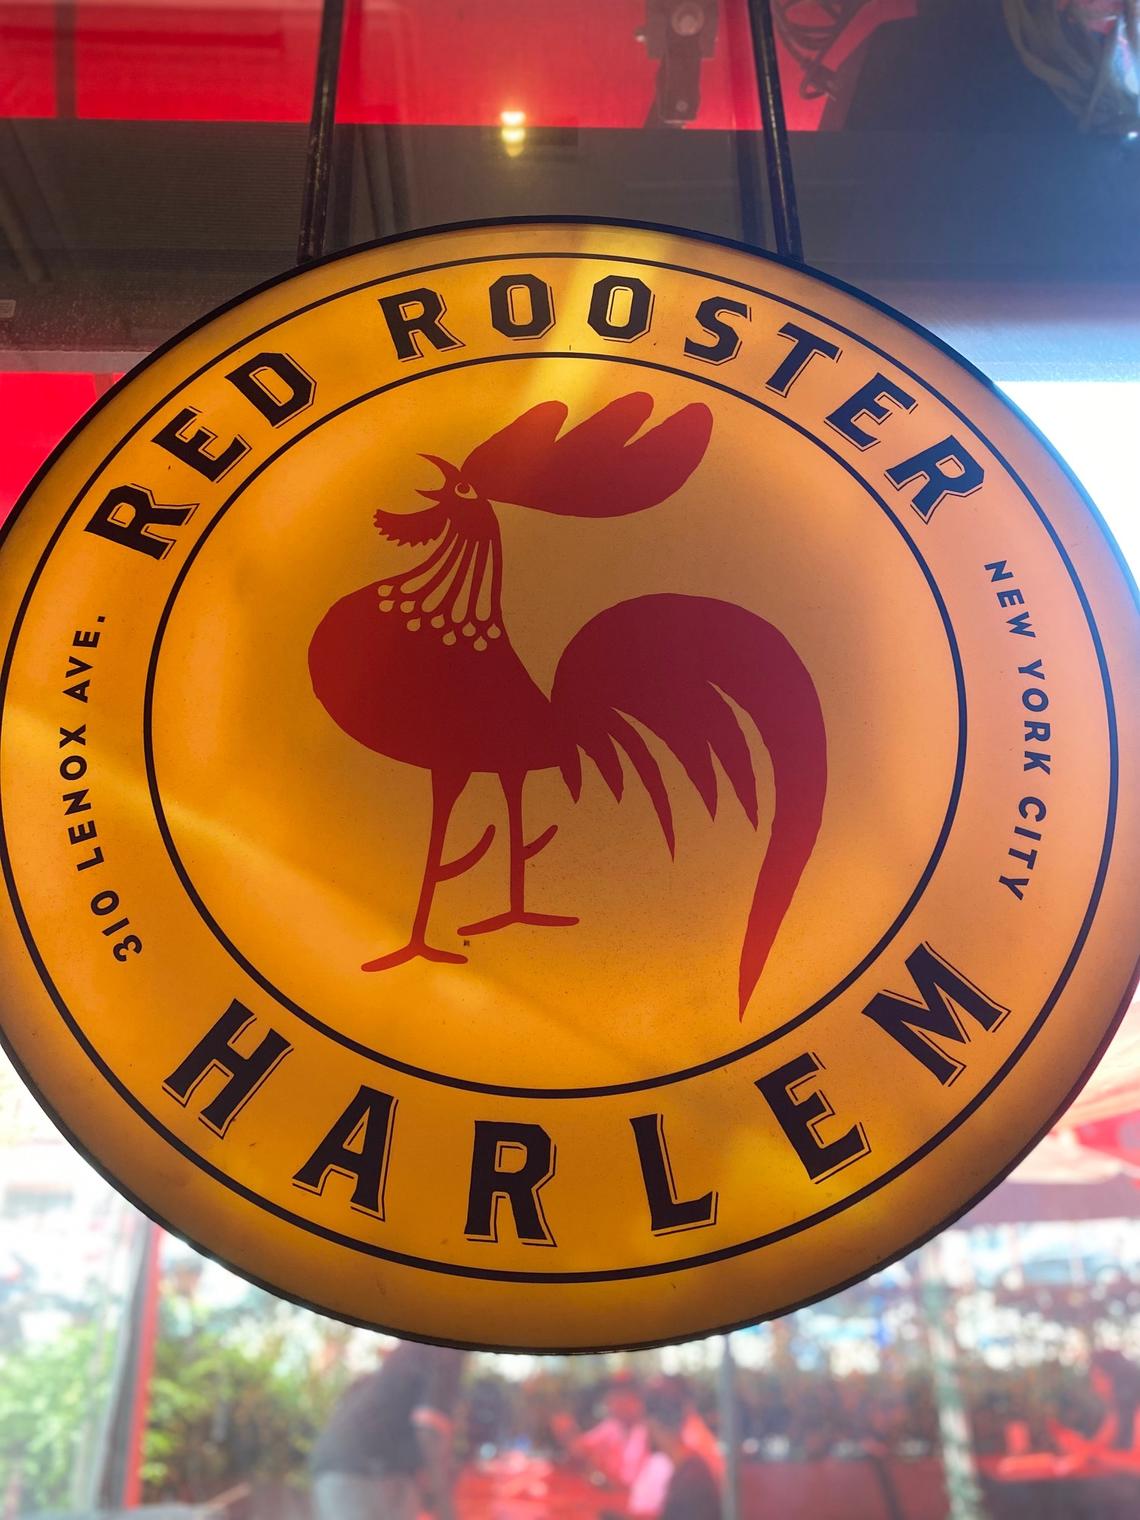 Have brunch in Harlem at the Red Rooster